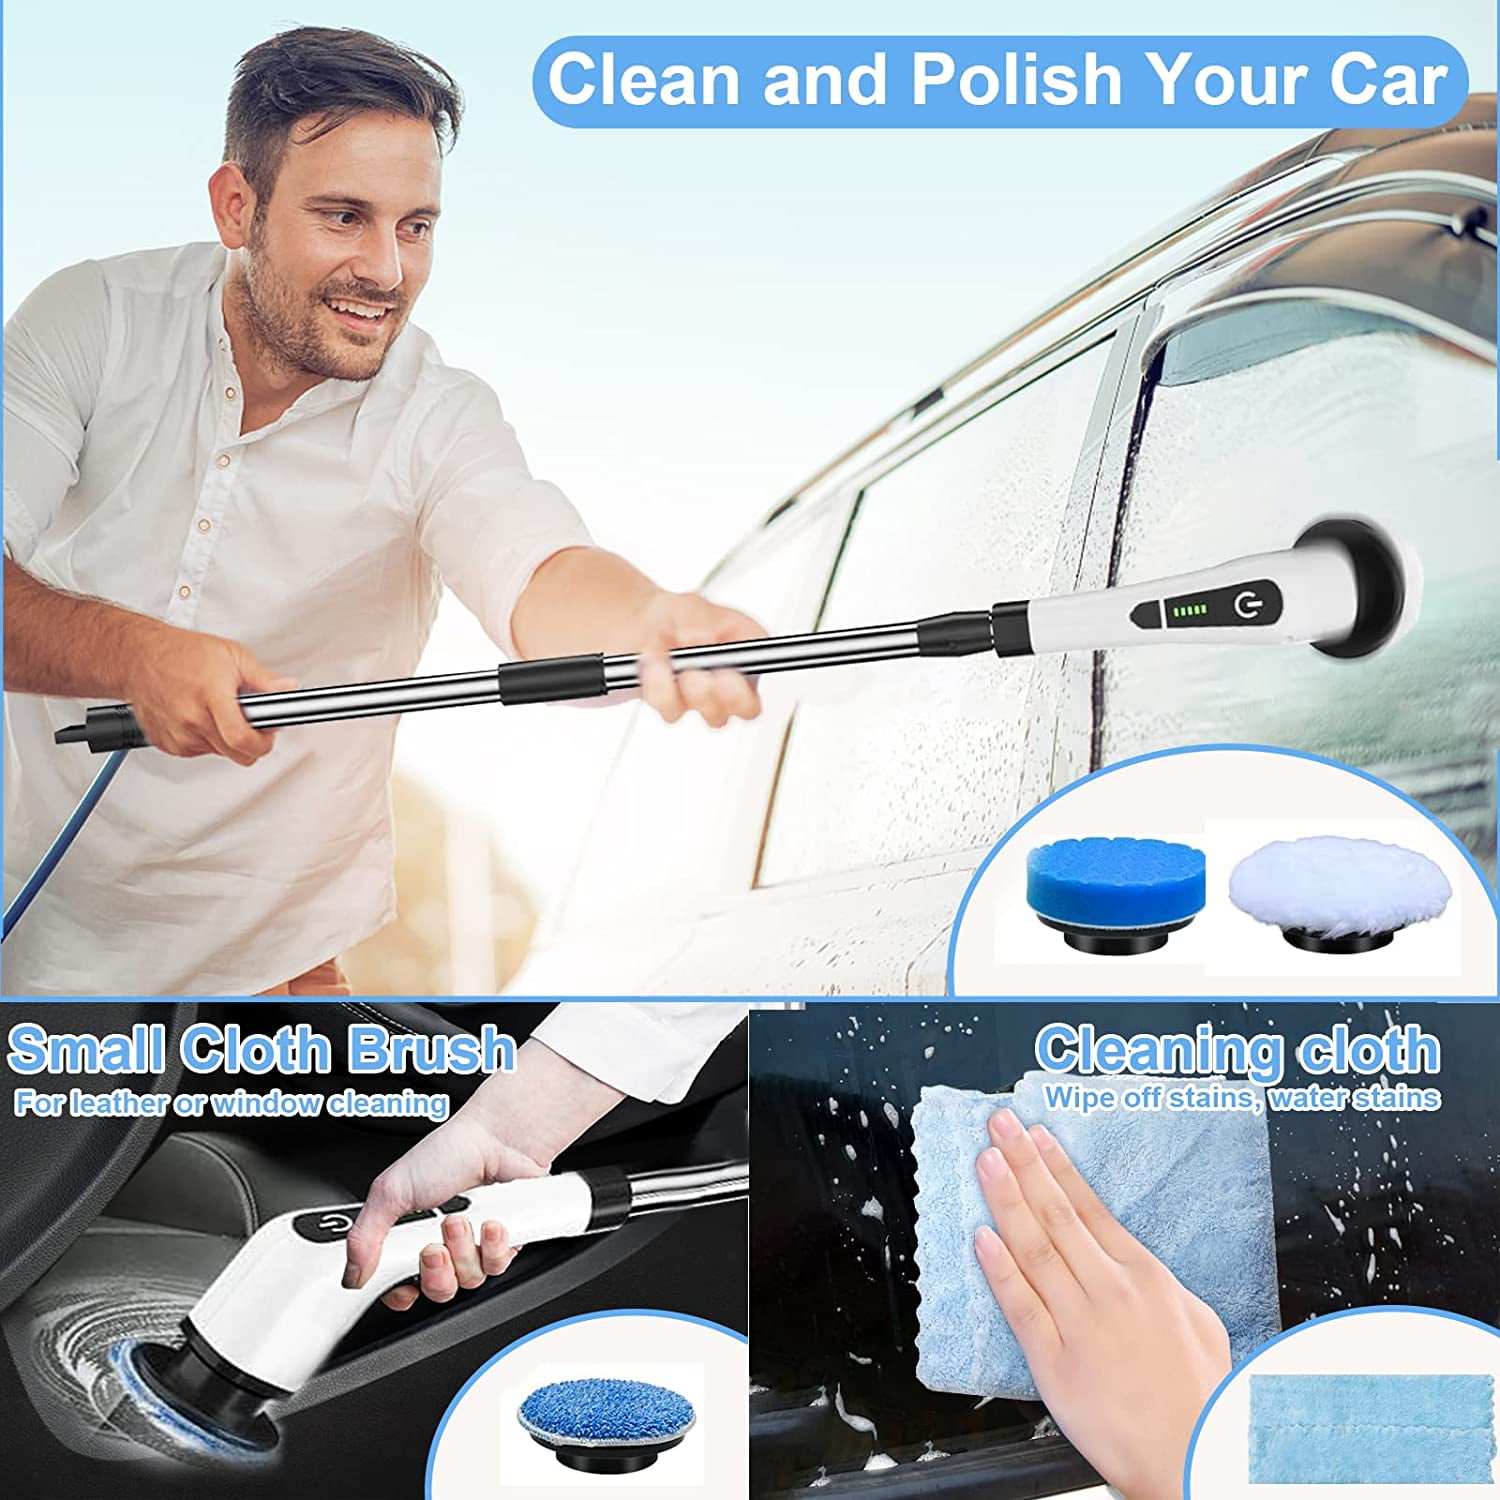 CLEANSPIN™ - 7 in 1 Electric Spin Scrubber – HH